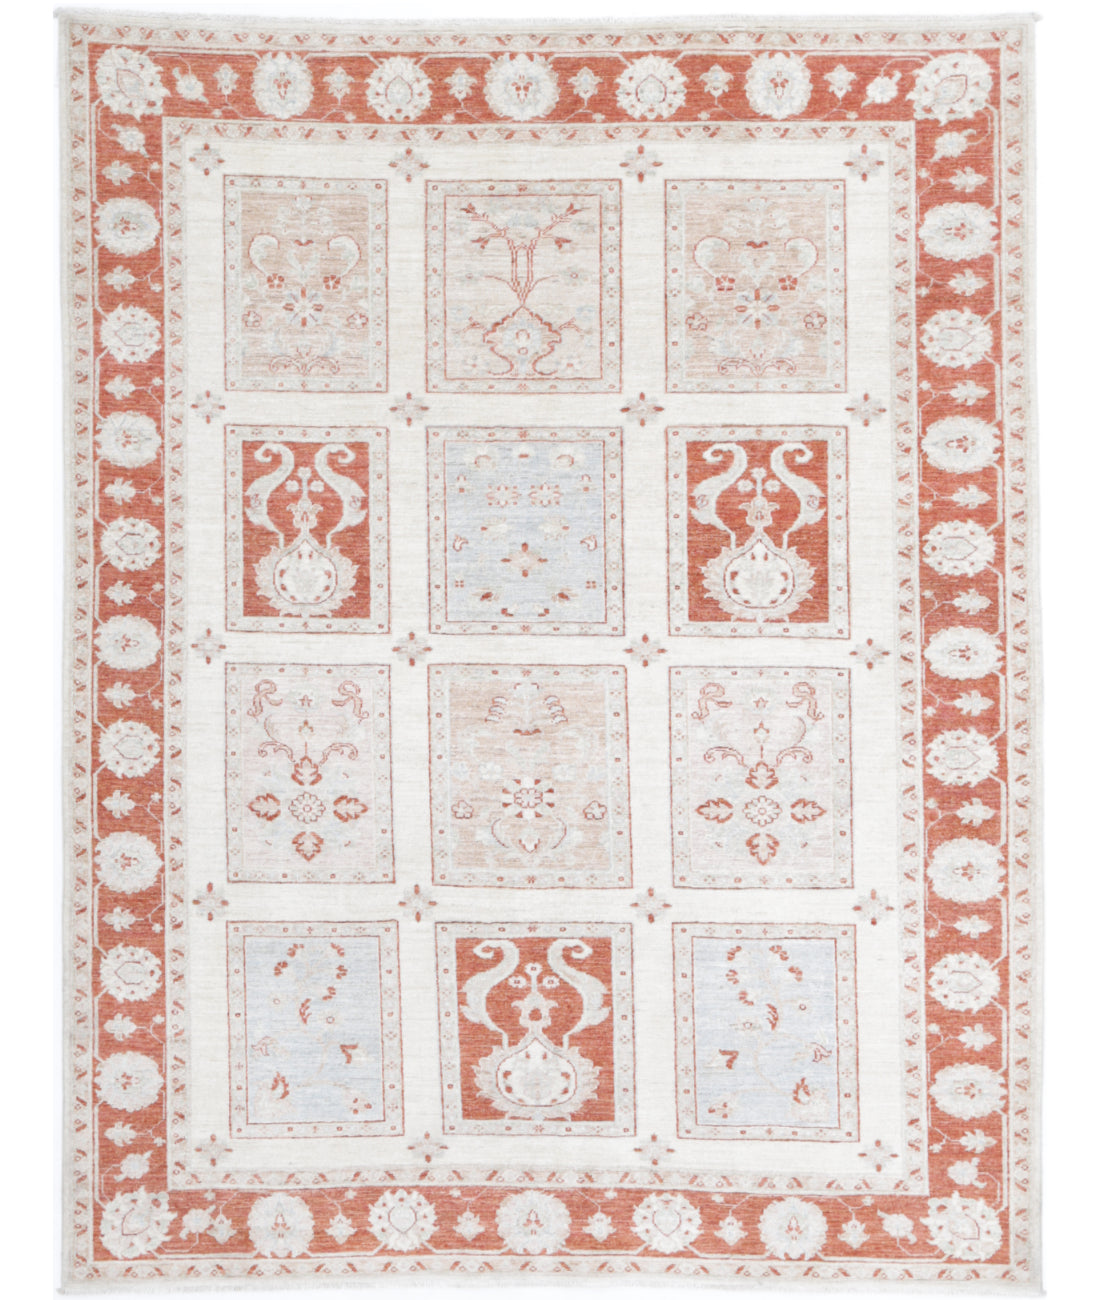 Hand Knotted Bakhtiari Wool Rug - 5'6'' x 7'2'' 5'6'' x 7'2'' (165 X 215) / Ivory / Red